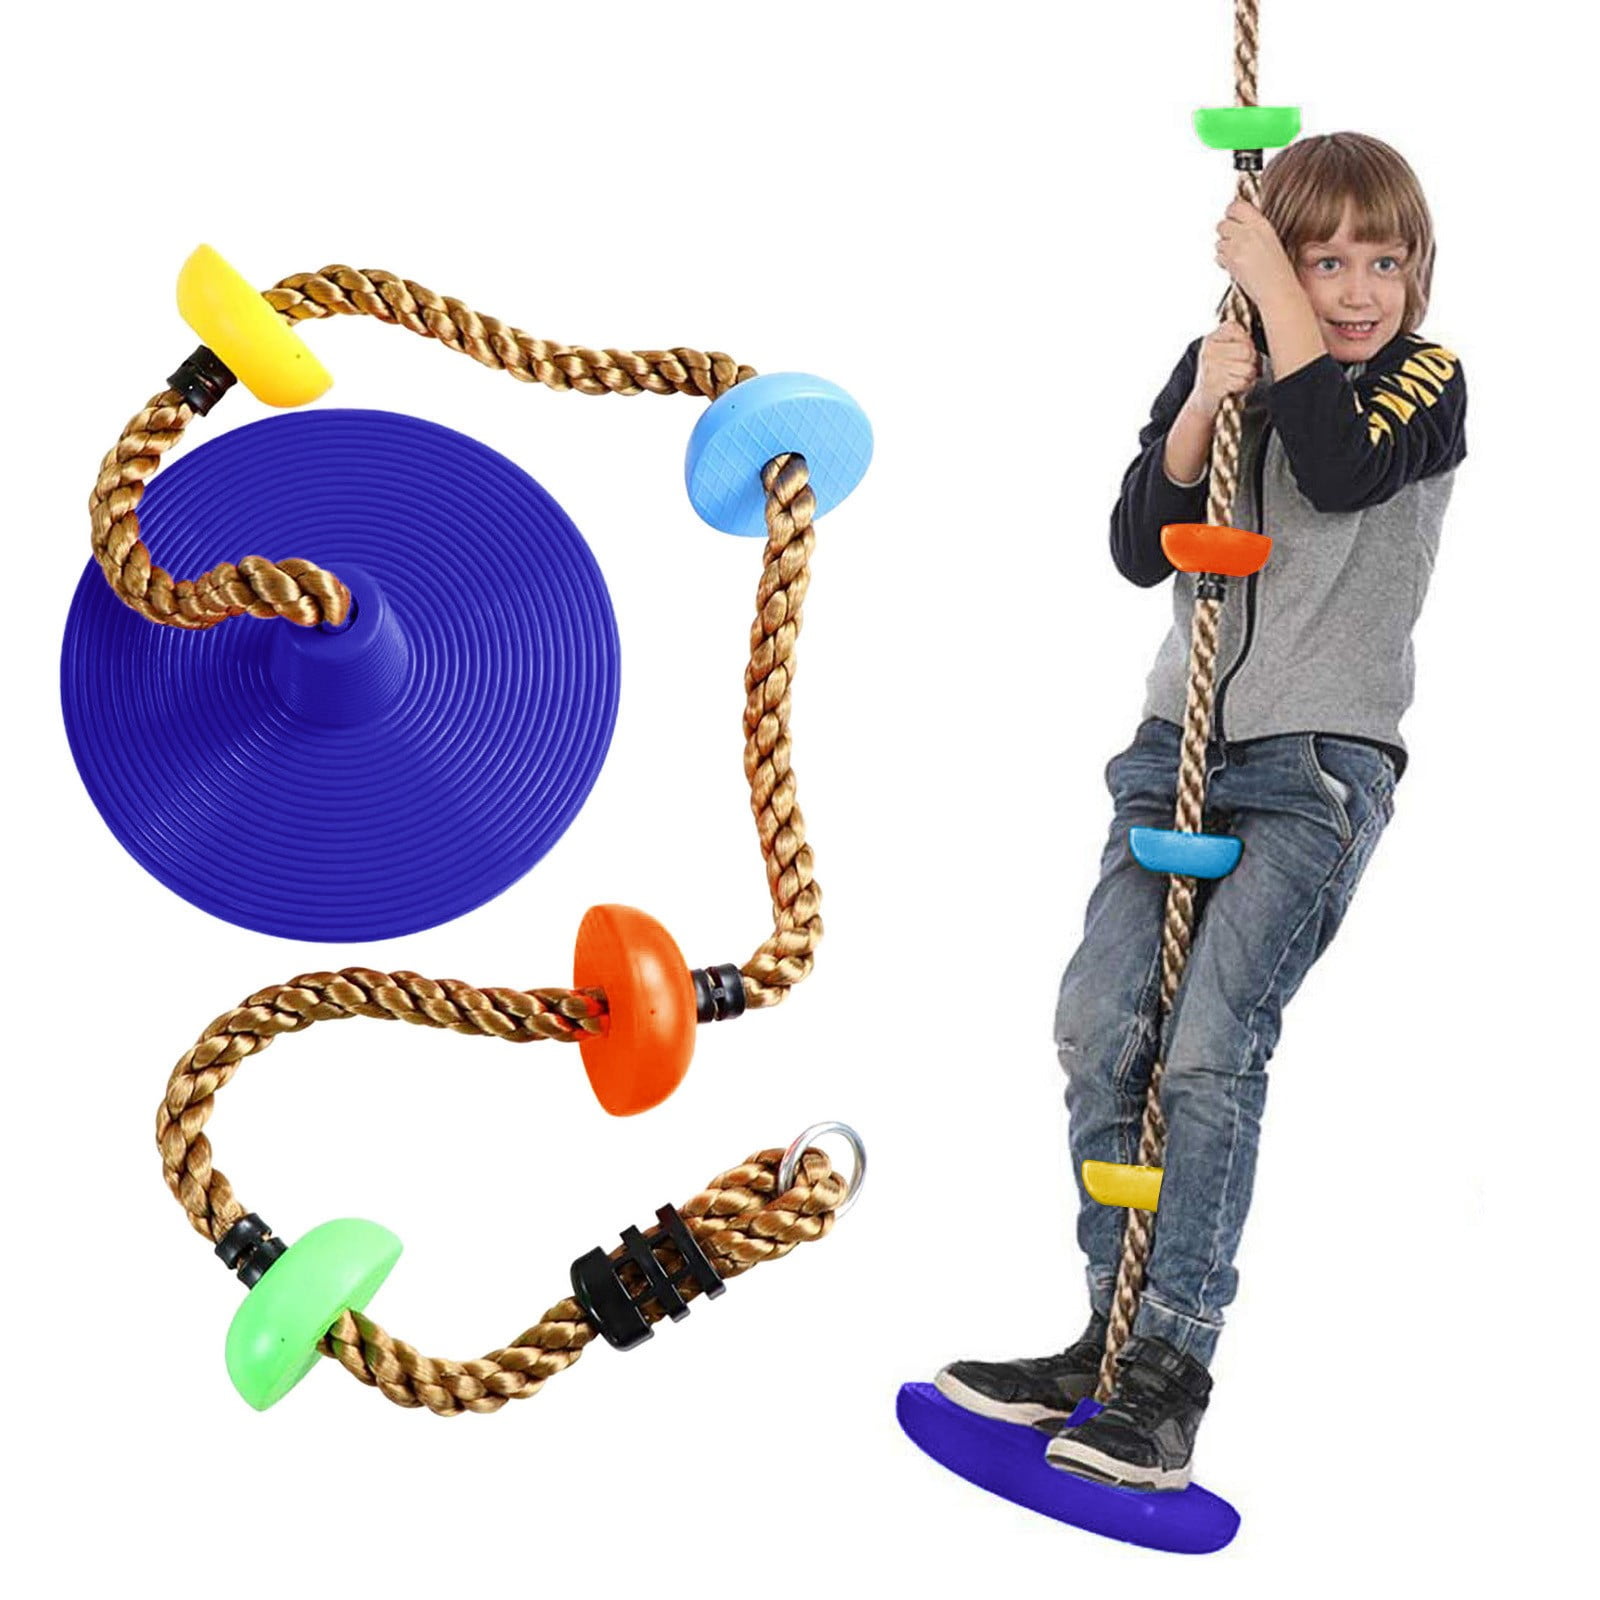 6.5ft ideal for tree climbingframes Kids Climbing Rope with Disc Swing Seat 2m 